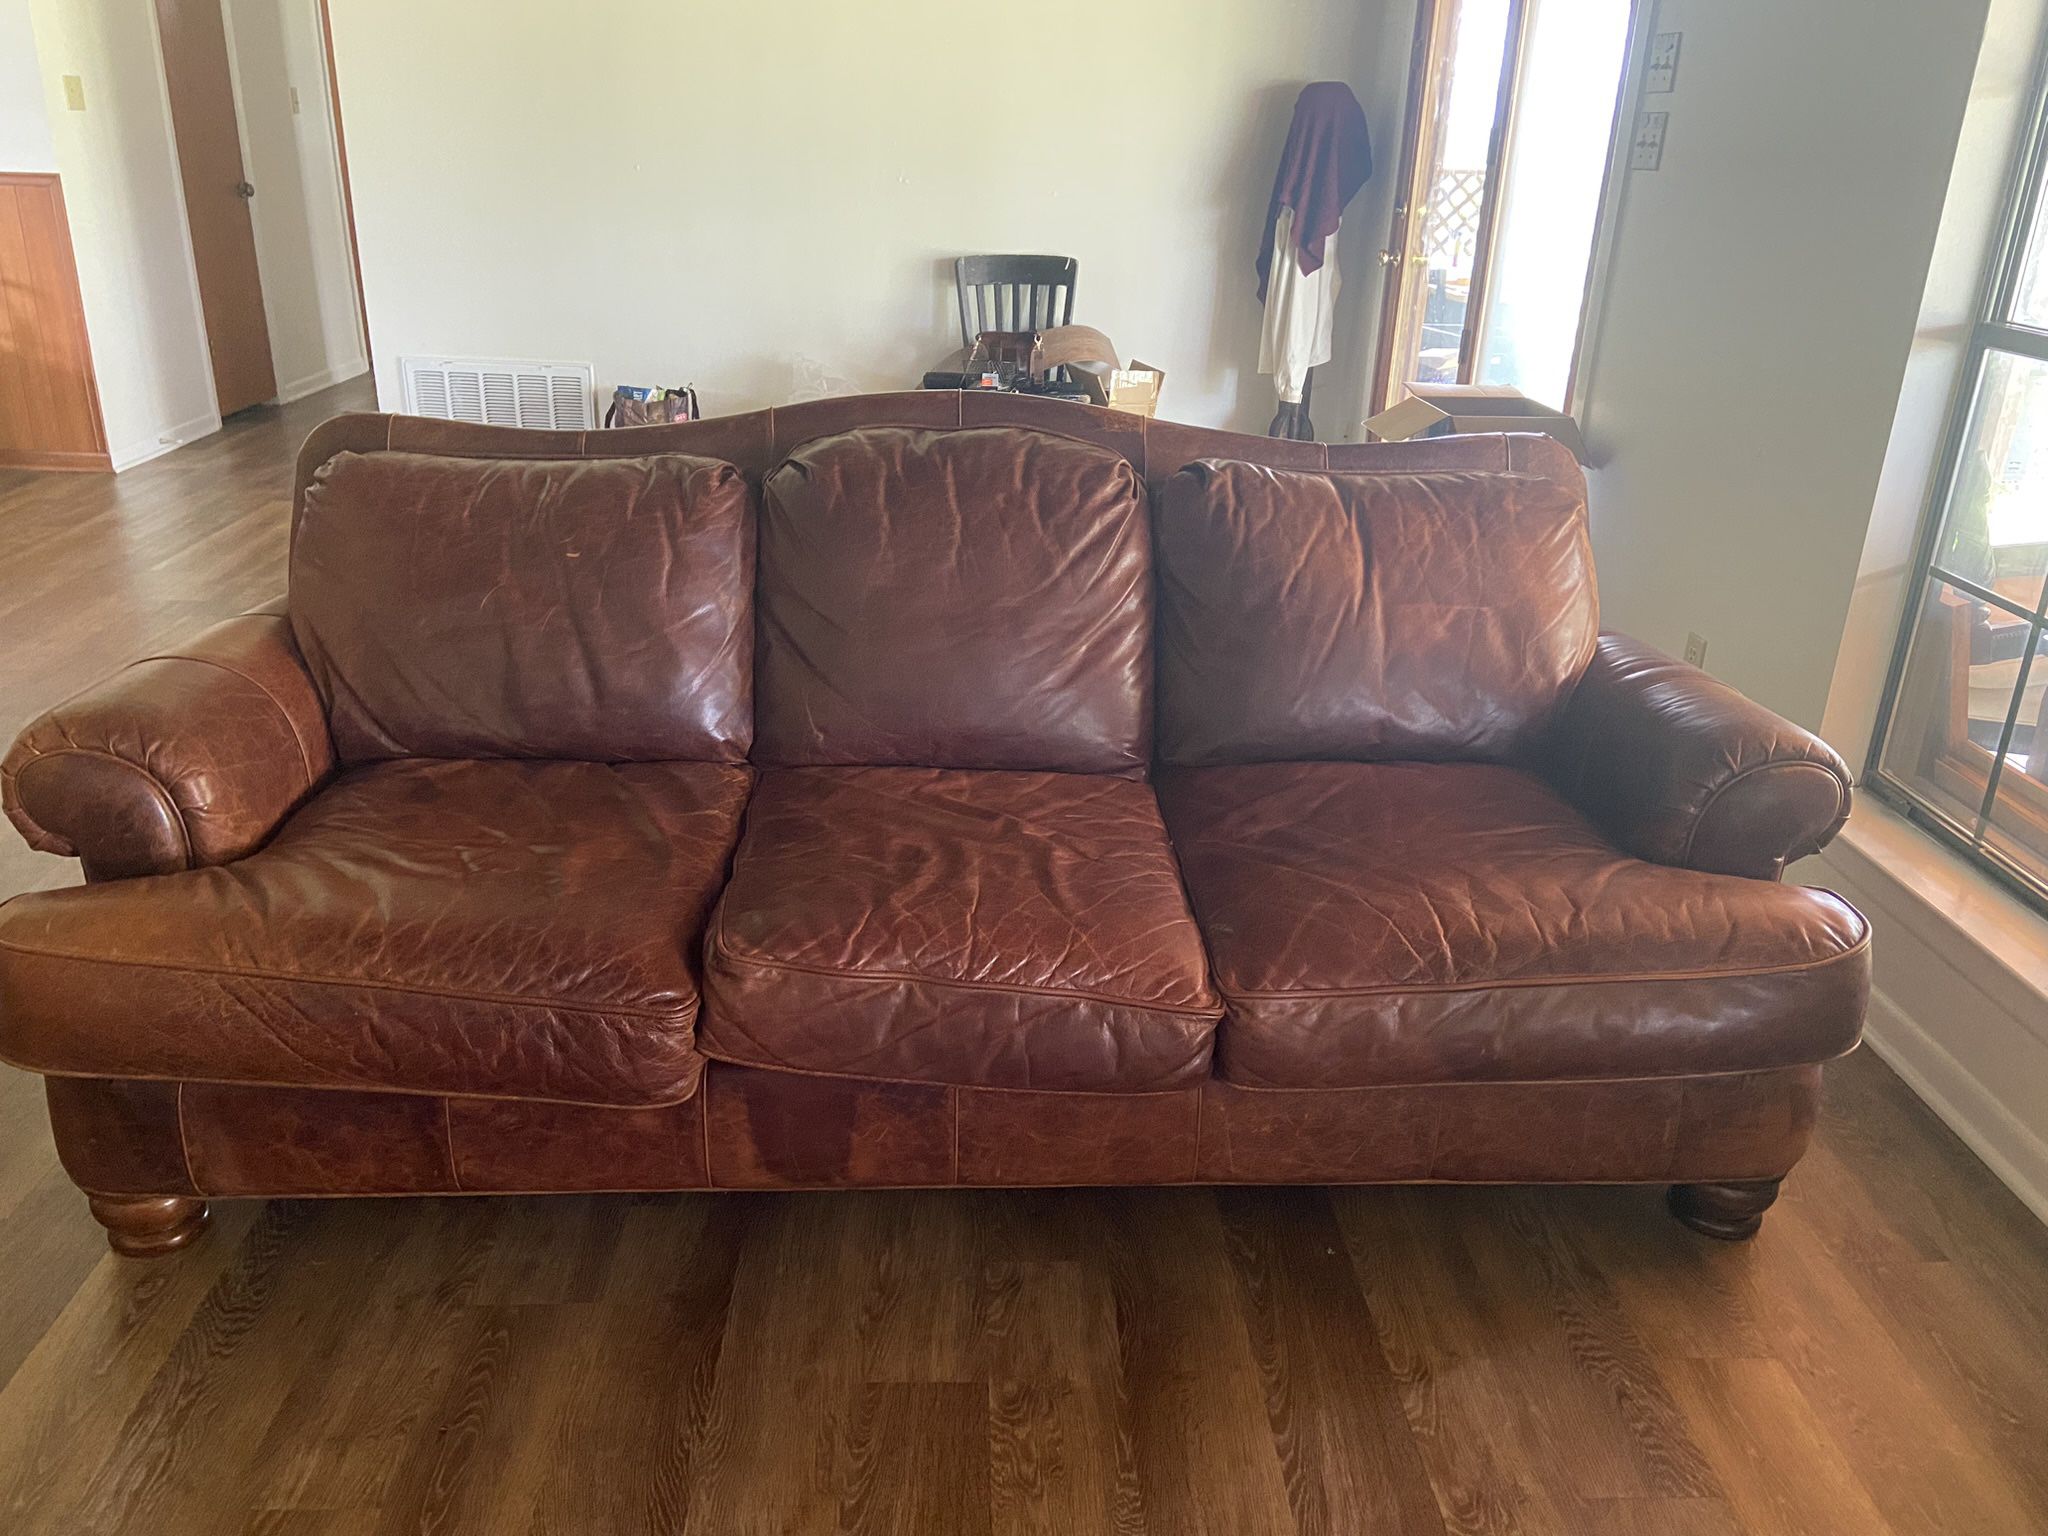 Make An Offer-Bassett Leather Couch